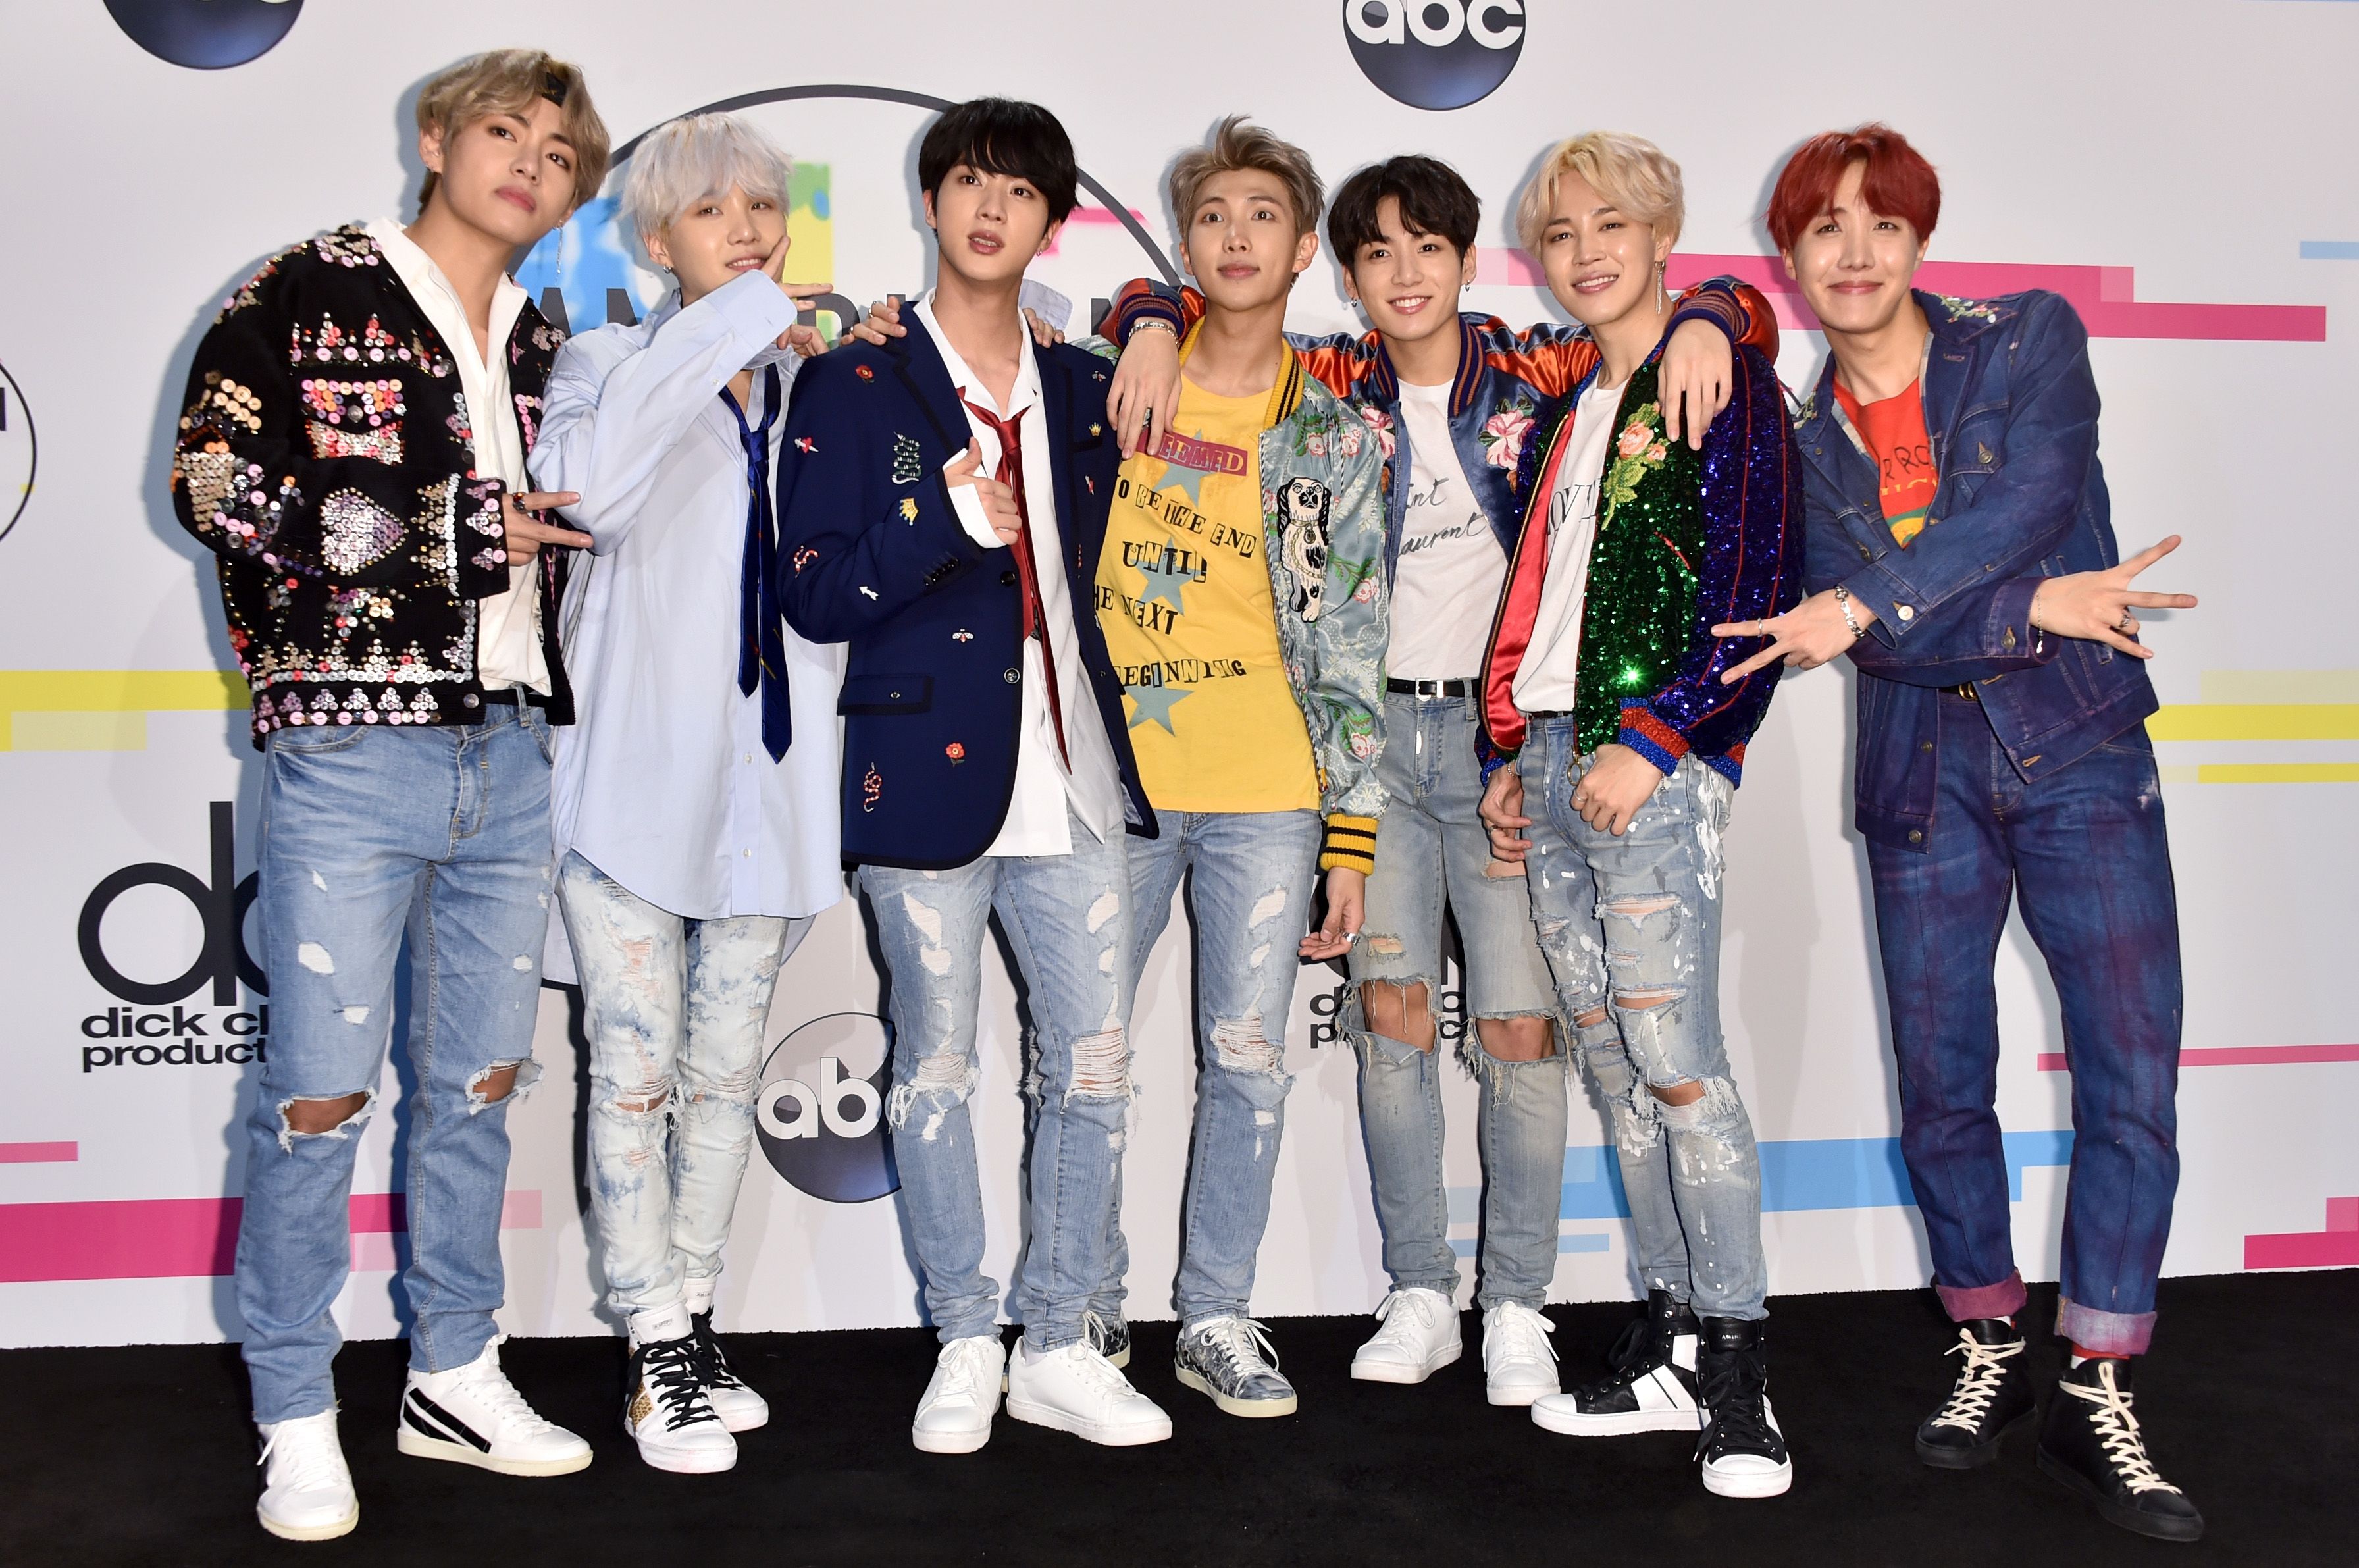 How BTS Became The World's Biggest Boy Band